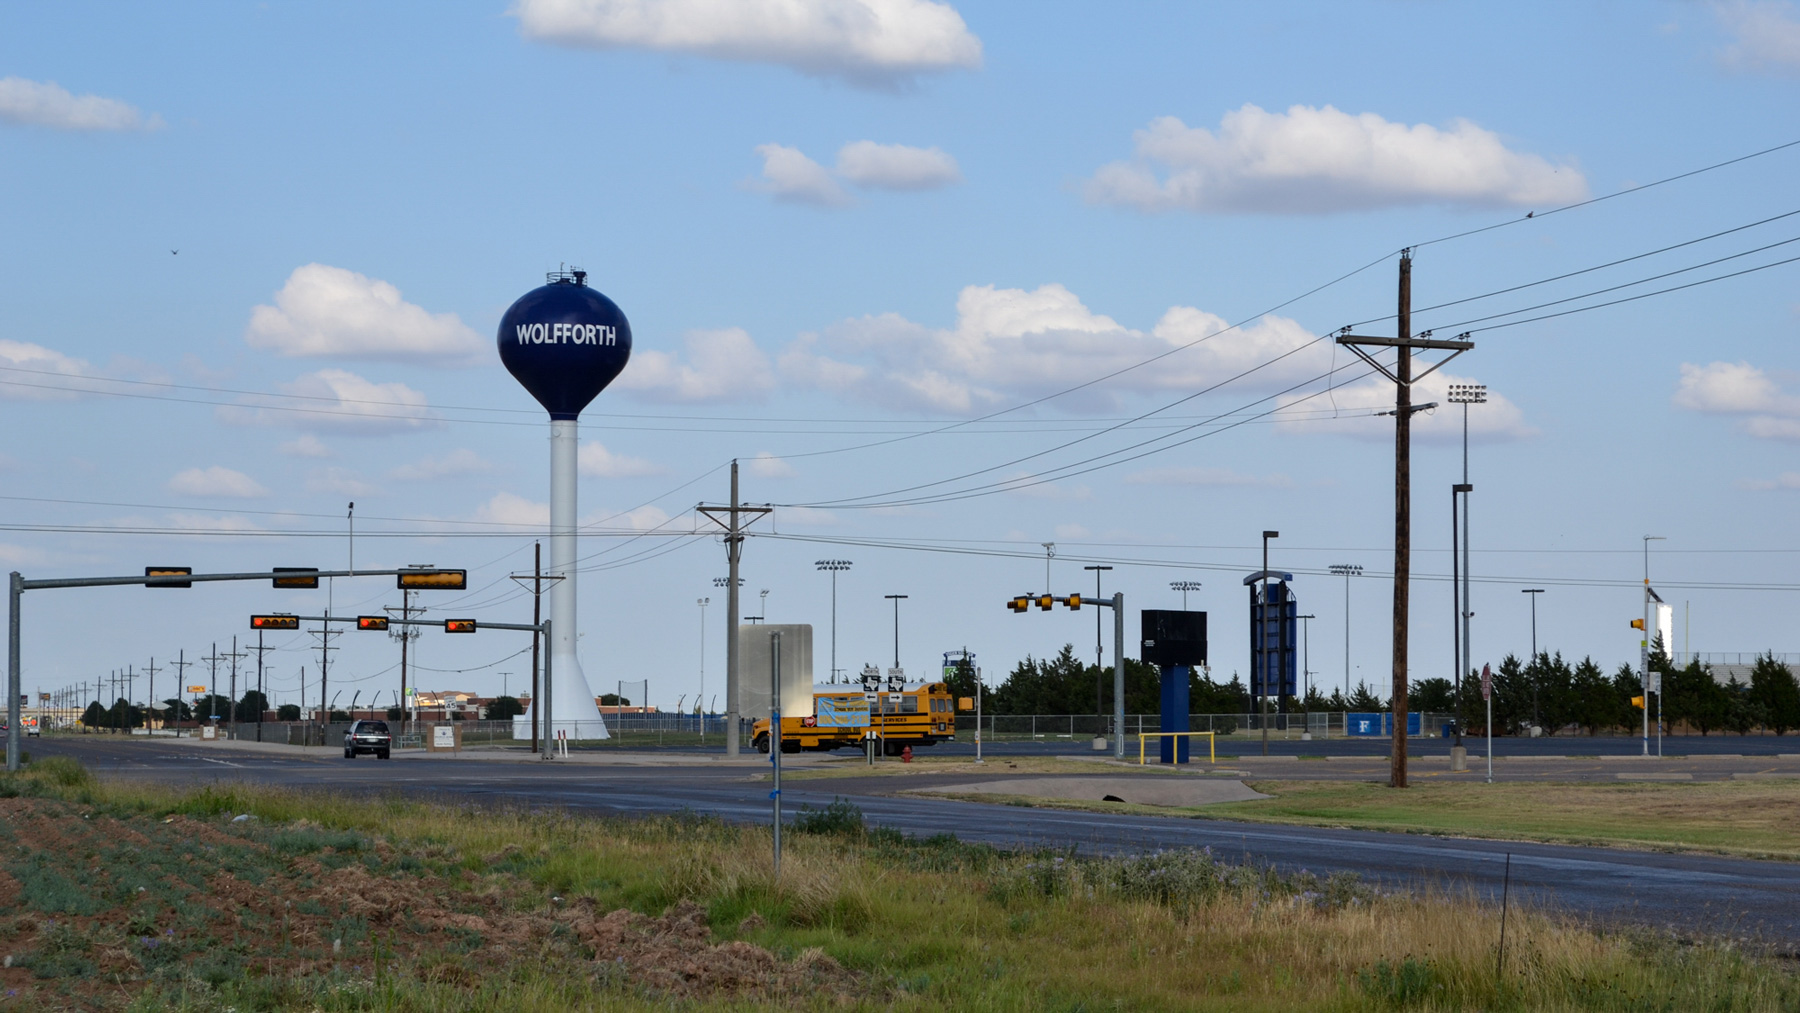 The water tower is one of the tallest structures in Wolfforth, Texas, a suburb of Lubbock. The city of 4,400 is growing, which helps fund projects like its water system upgrade. (Elizabeth Sims/News21)